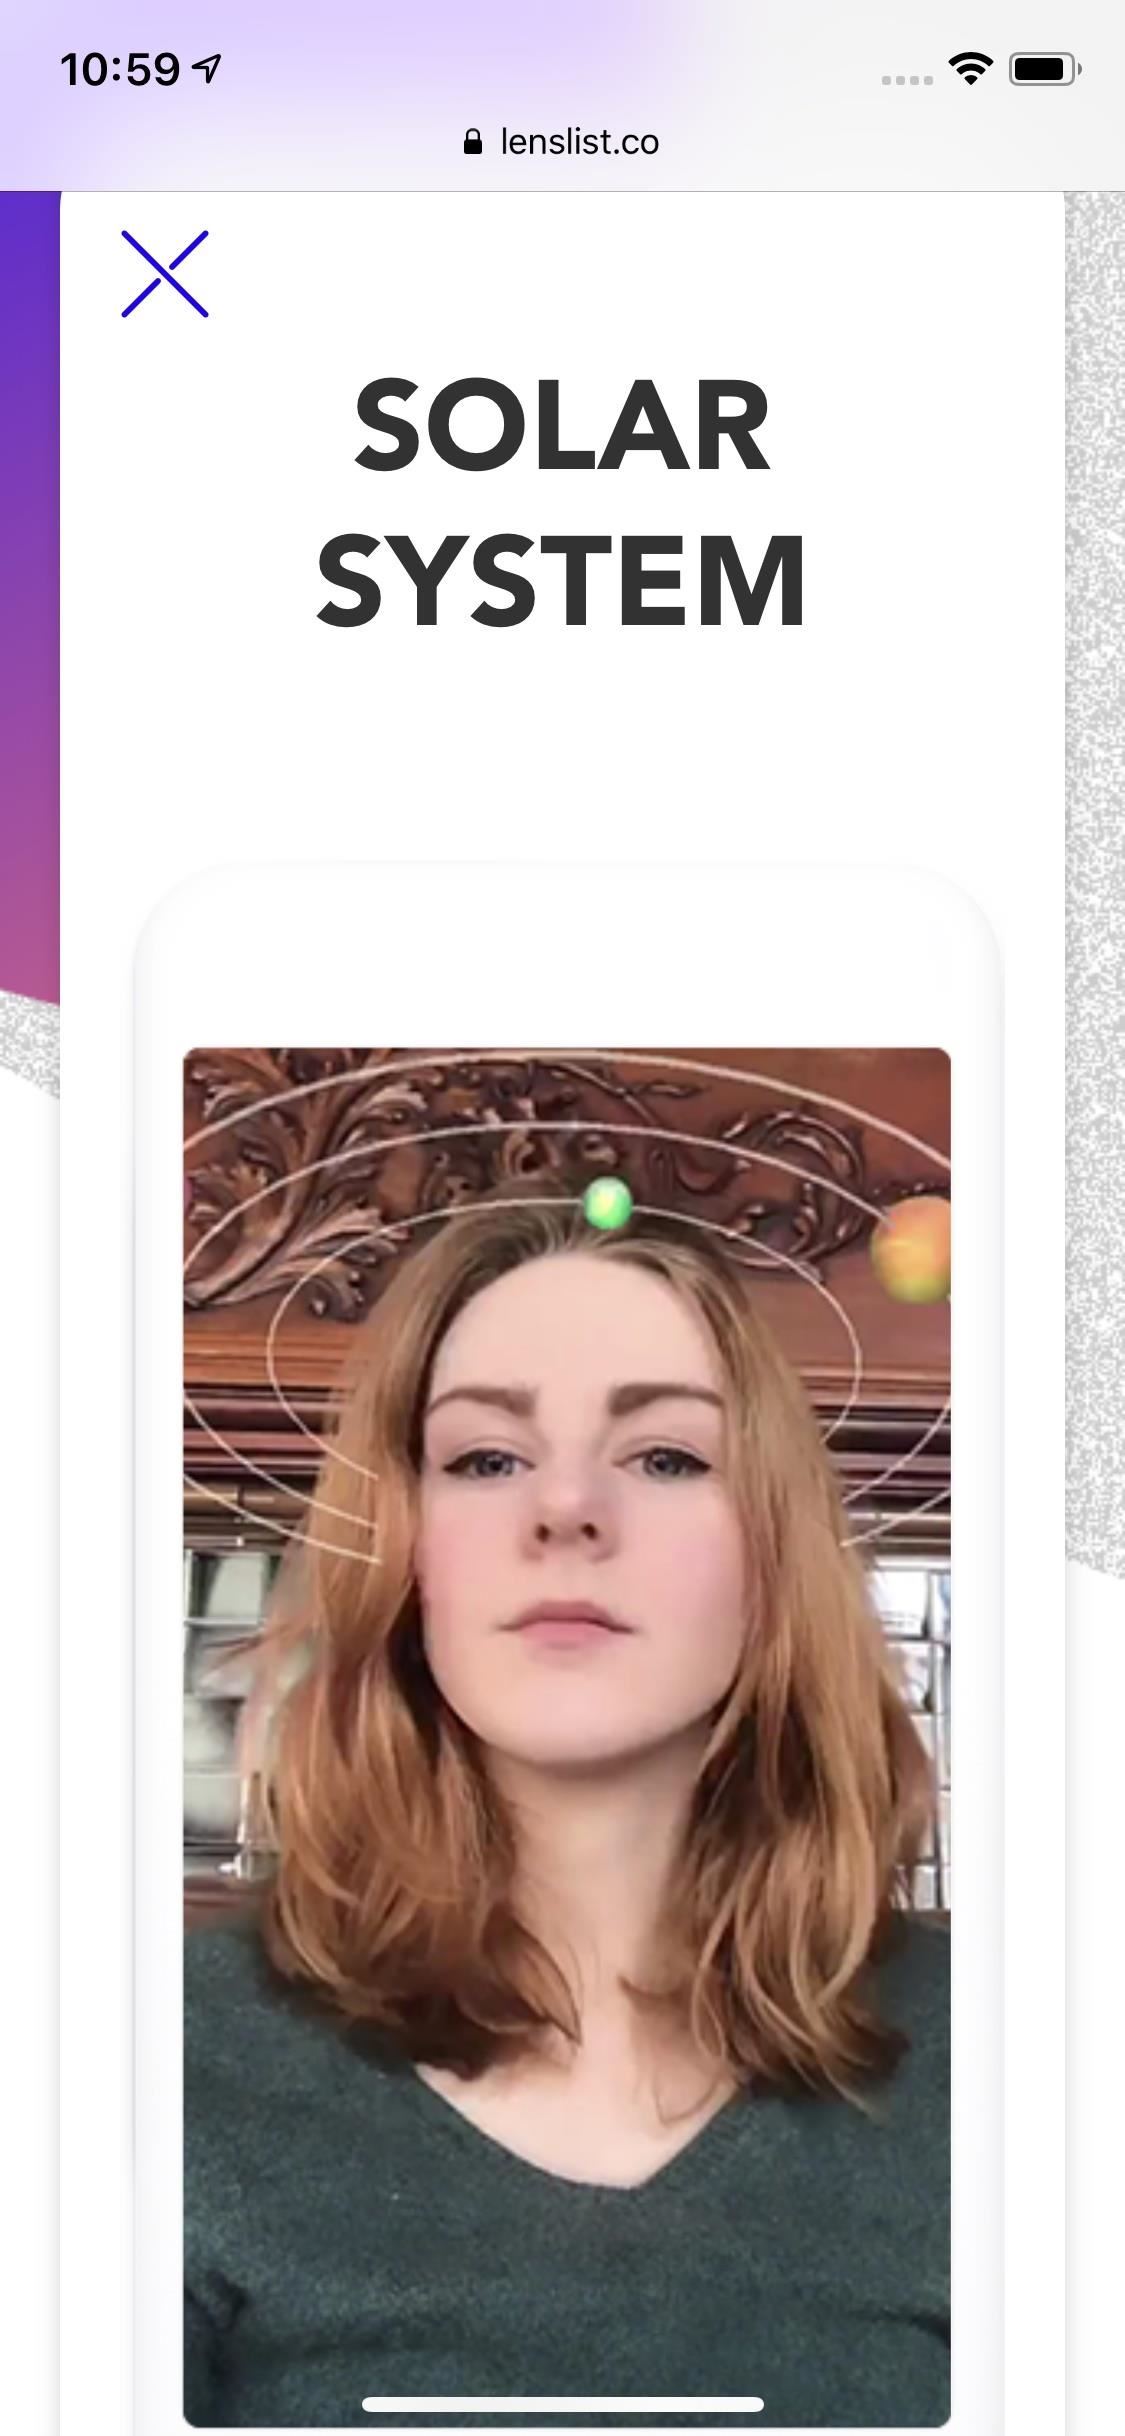 Get Unique Face Filters by Following AR Creators on Instagram